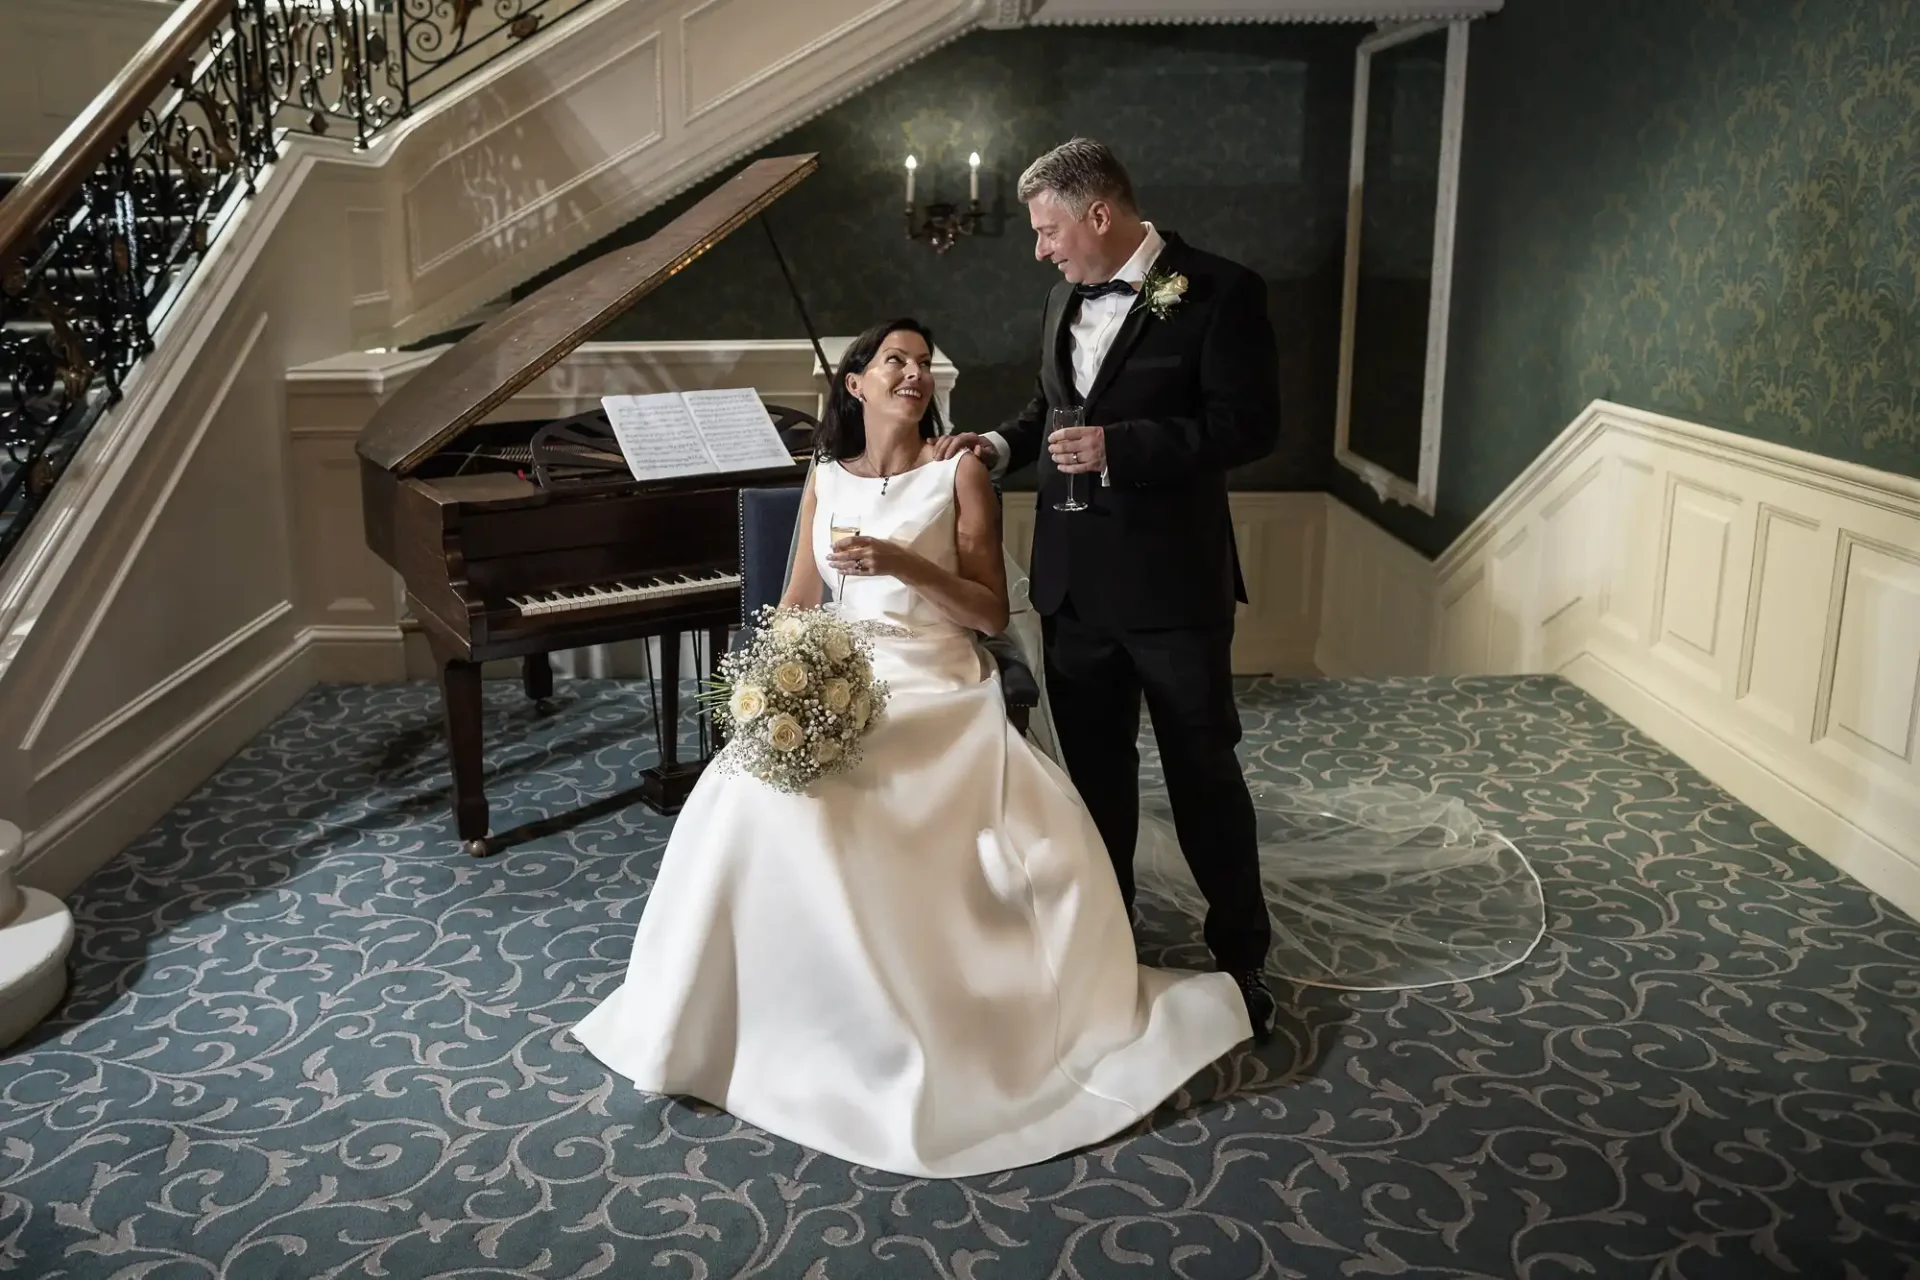 Bride and groom smiling at each other beside a piano in an elegant room, bride seated with a bouquet, groom standing with a glass in hand.